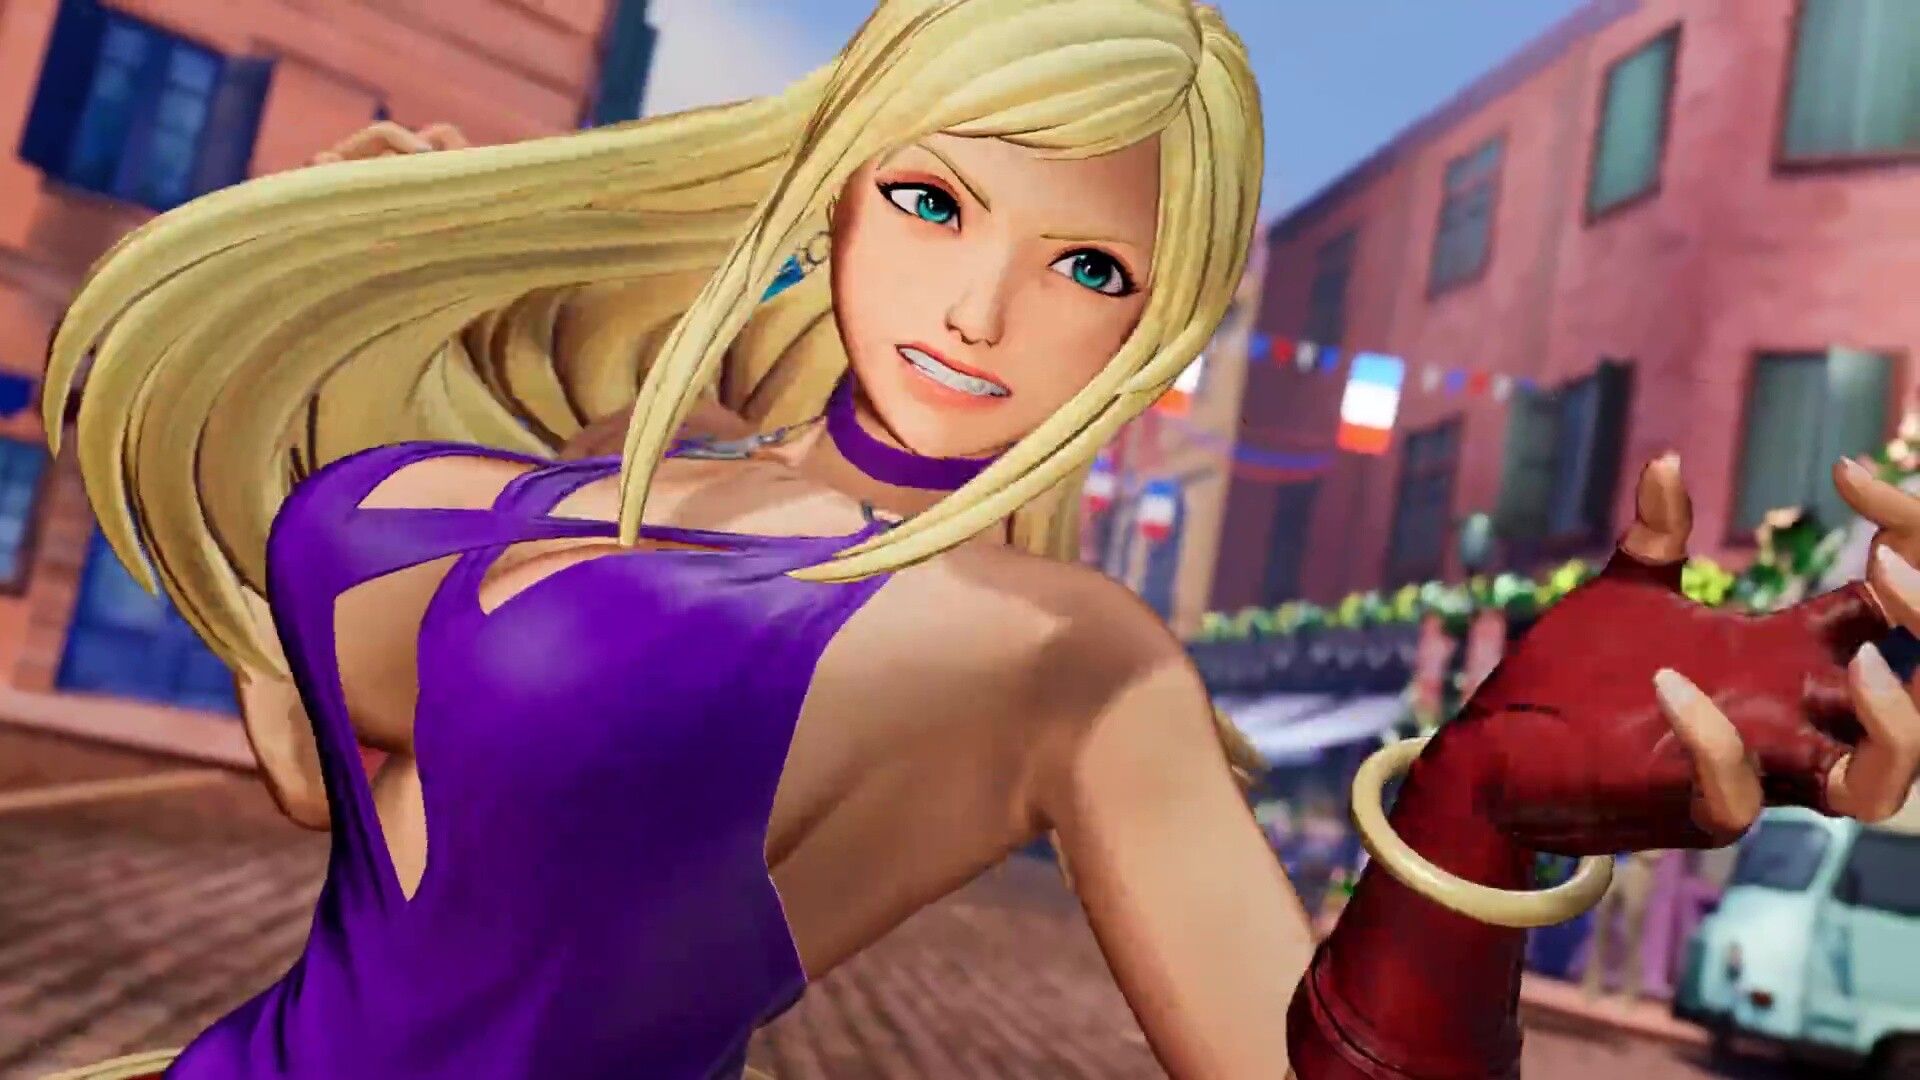 THE KING OF FIGHTERS XV B. Jenny enters the DLC in an erotic dress with and rounded thighs 17